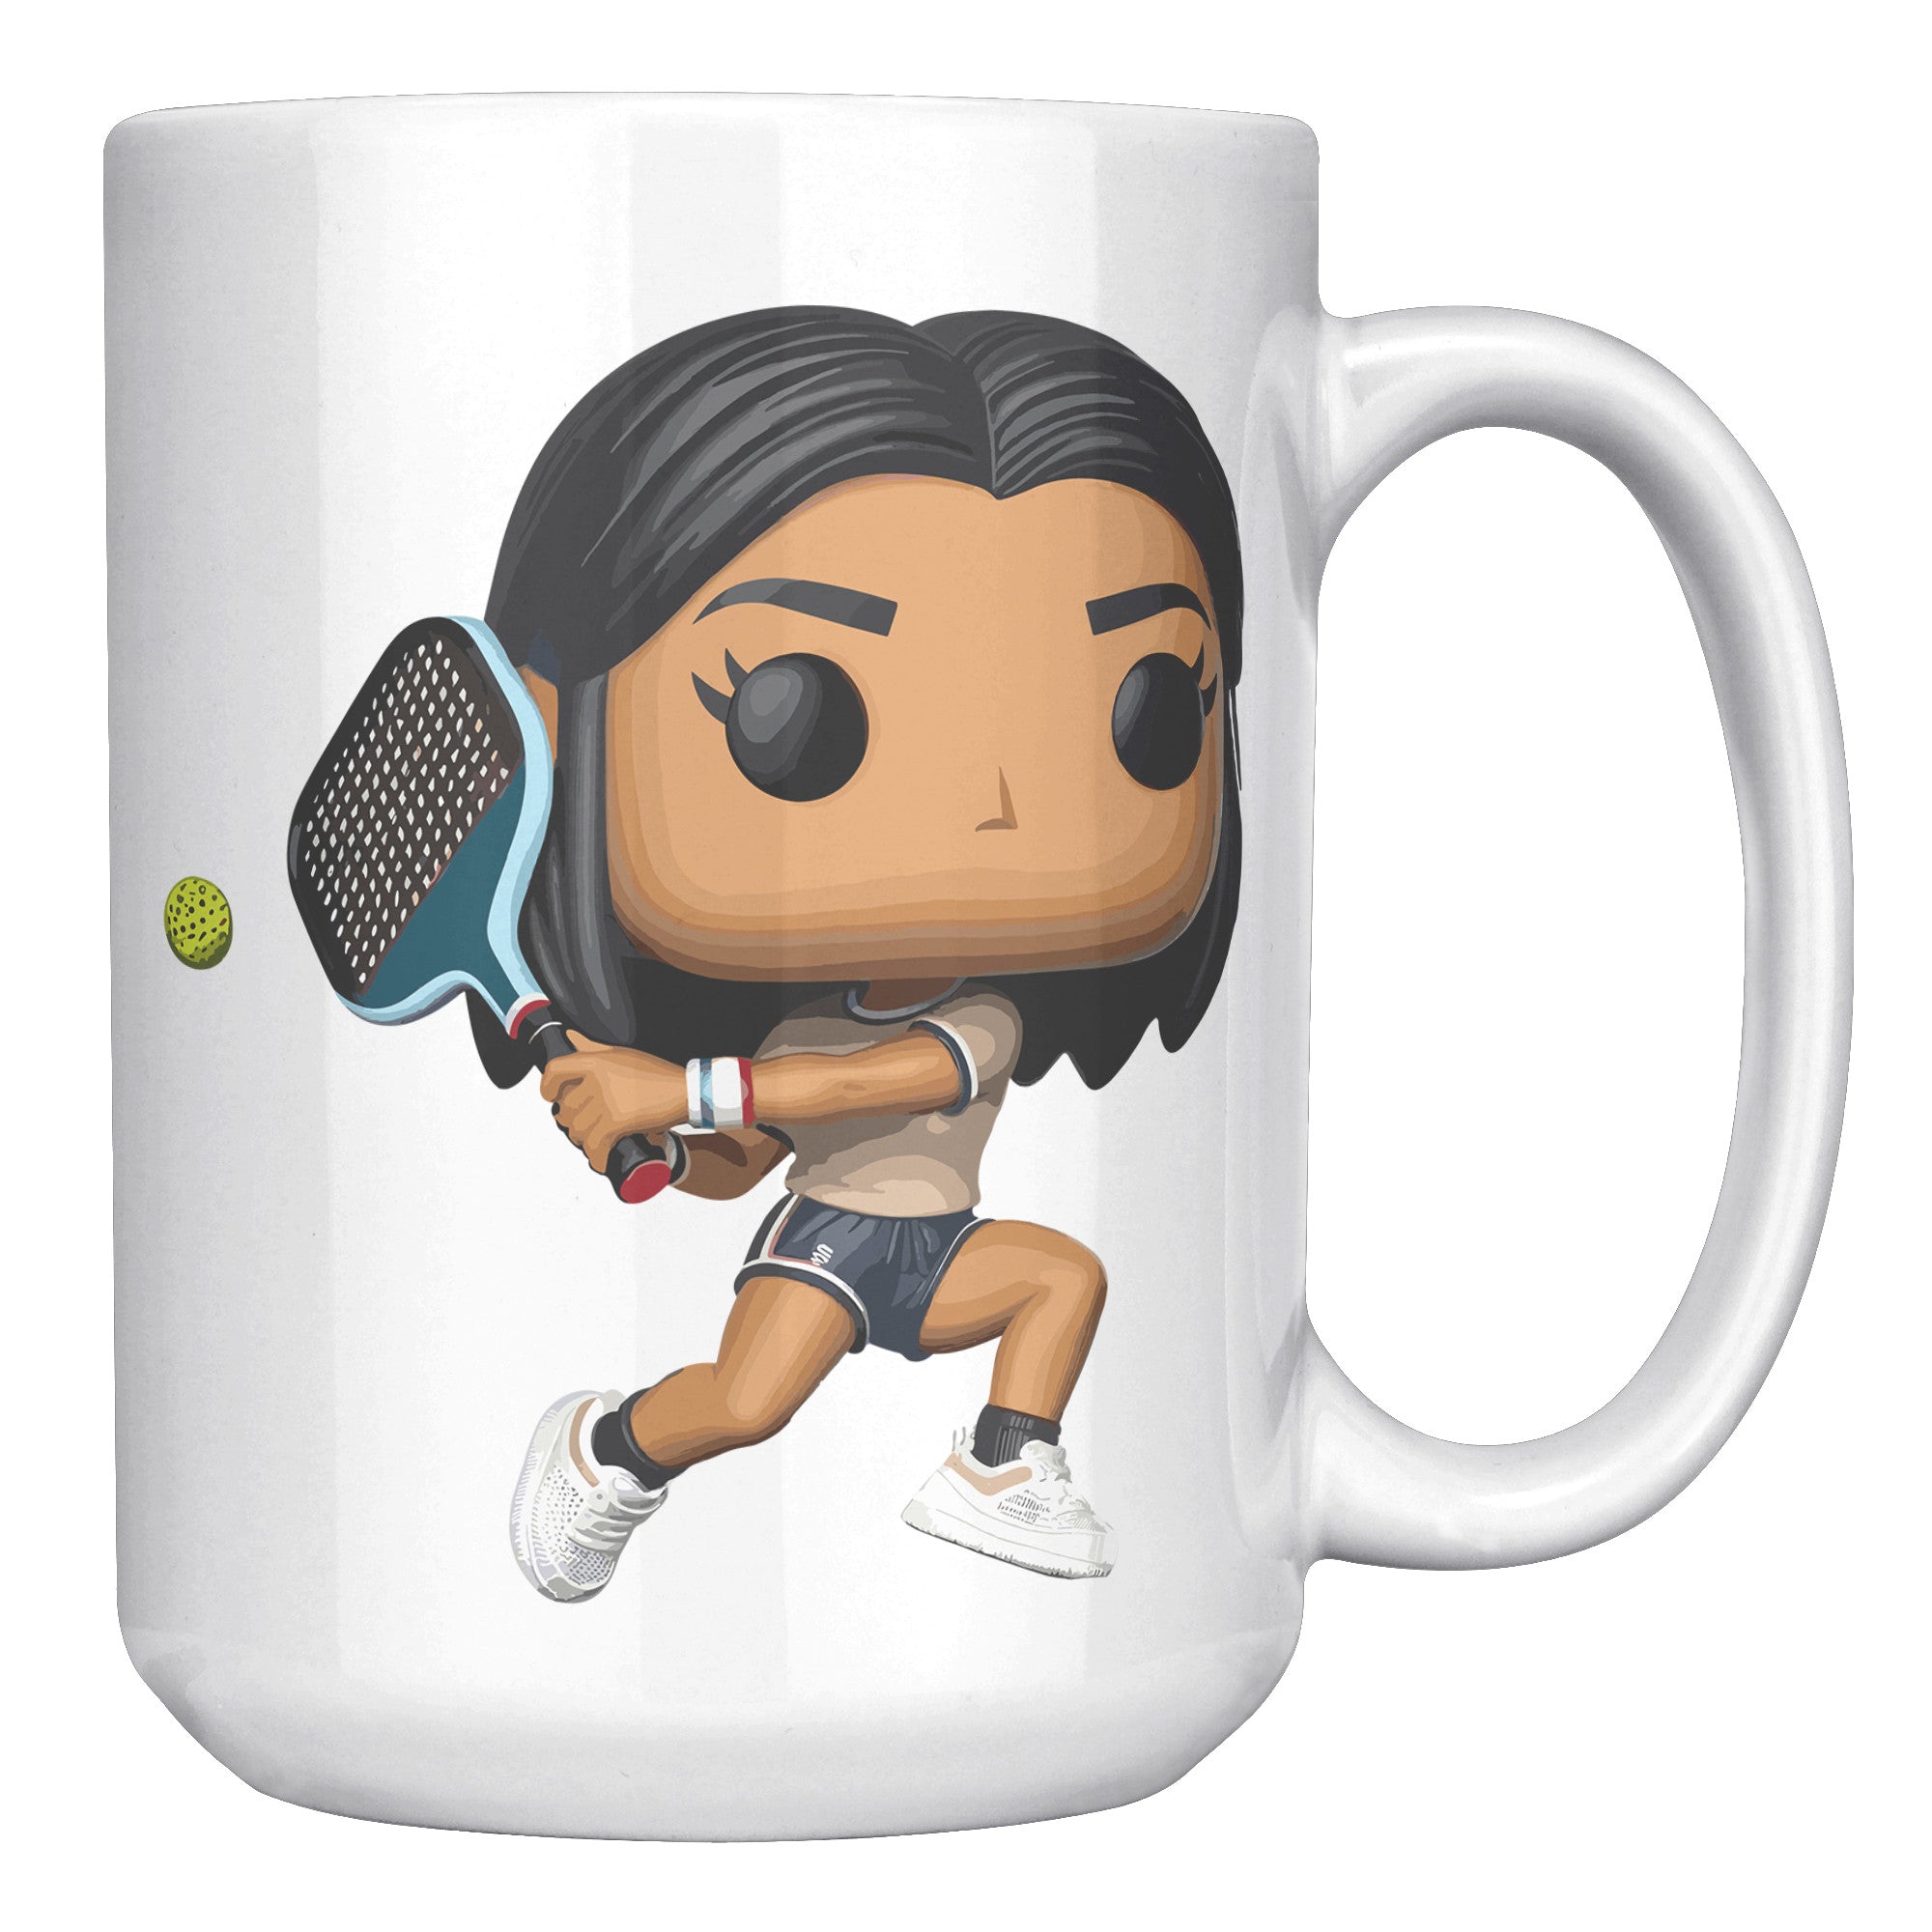 "Funko Pop Style Pickle Ball Player Girl Coffee Mug - Cute Athletic Cup - Perfect Gift for Pickle Ball Enthusiasts - Sporty Chic Apparel" - E1